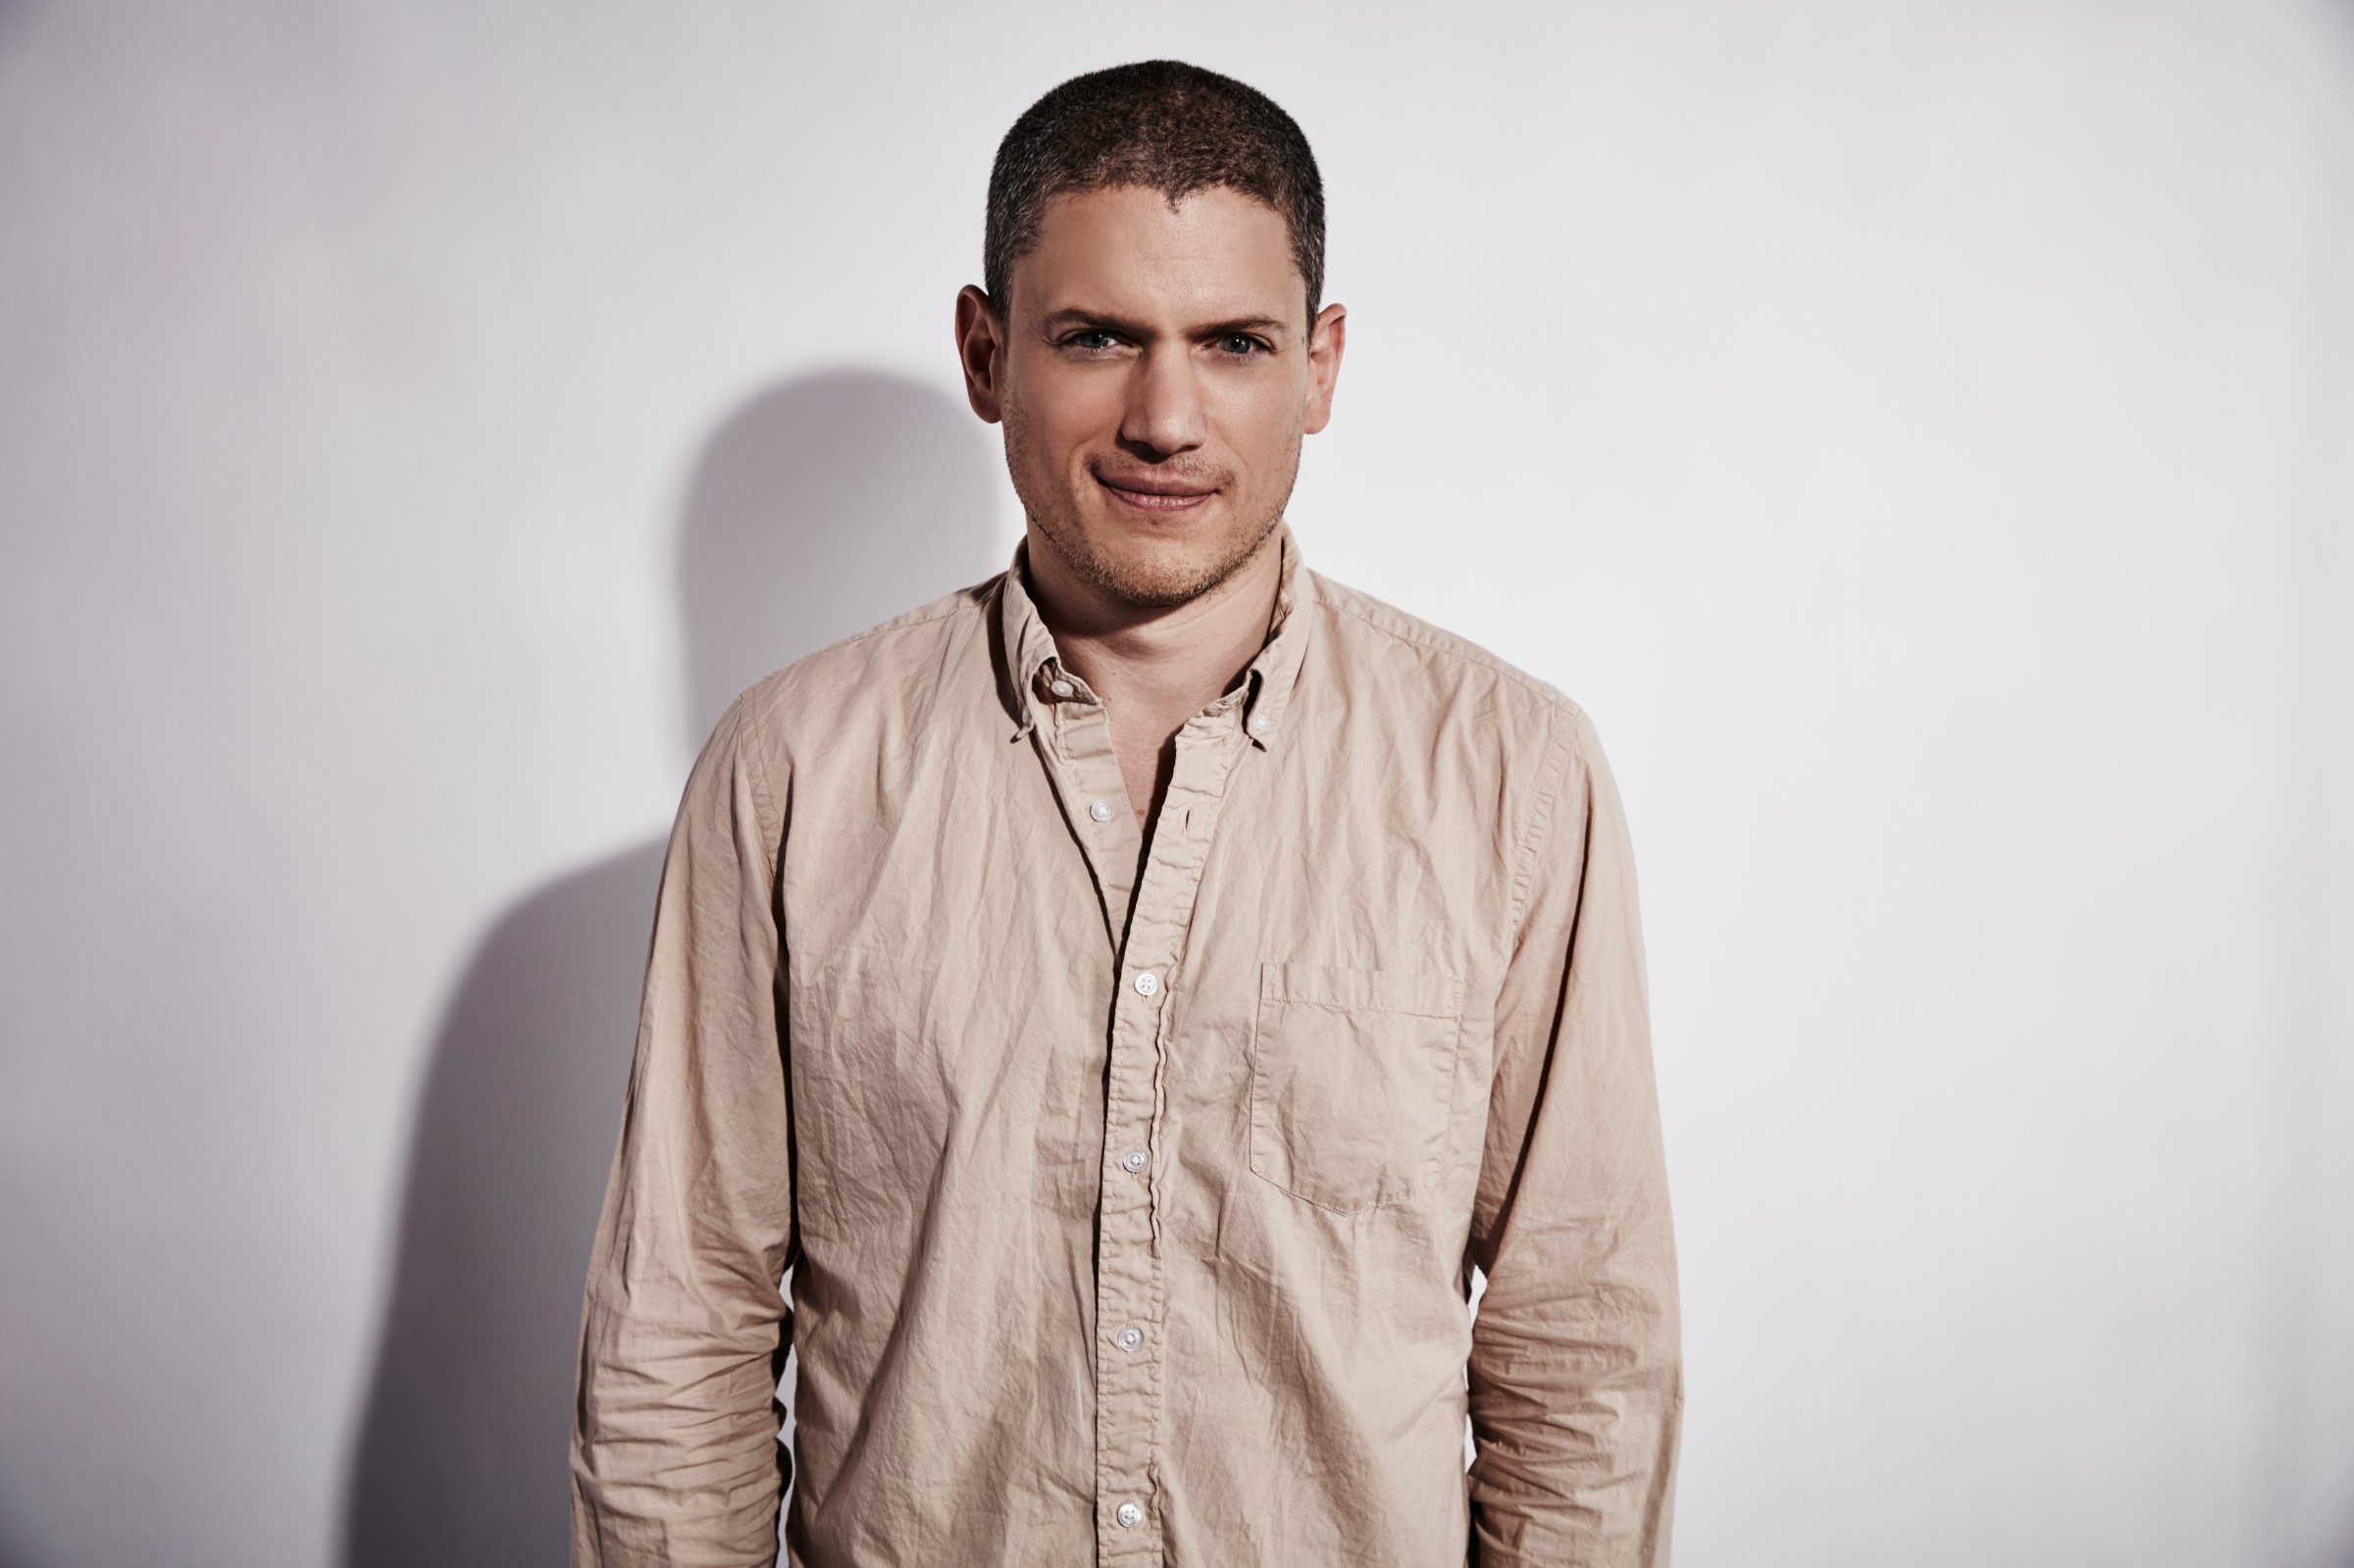 Actor Wentworth Miller of "Legends of Tomorrow" poses for a portrait at the Getty Images Portrait Studio Powered By Samsung Galaxy At Comic-Con International 2015 at Hard Rock Hotel San Diego on July 11, 2015 in San Diego, California.